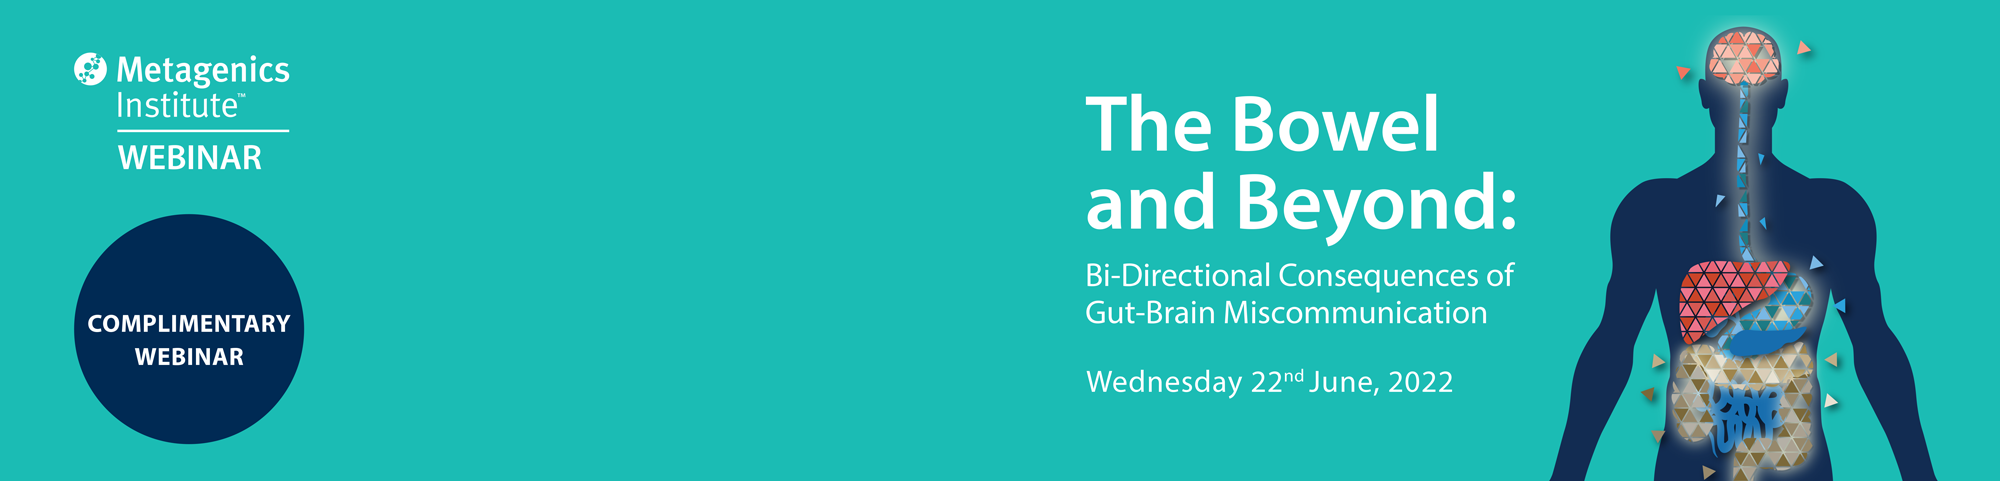 The Bowel and Beyond: Bi-Directional Consequences of Gut-Brain Miscommunication